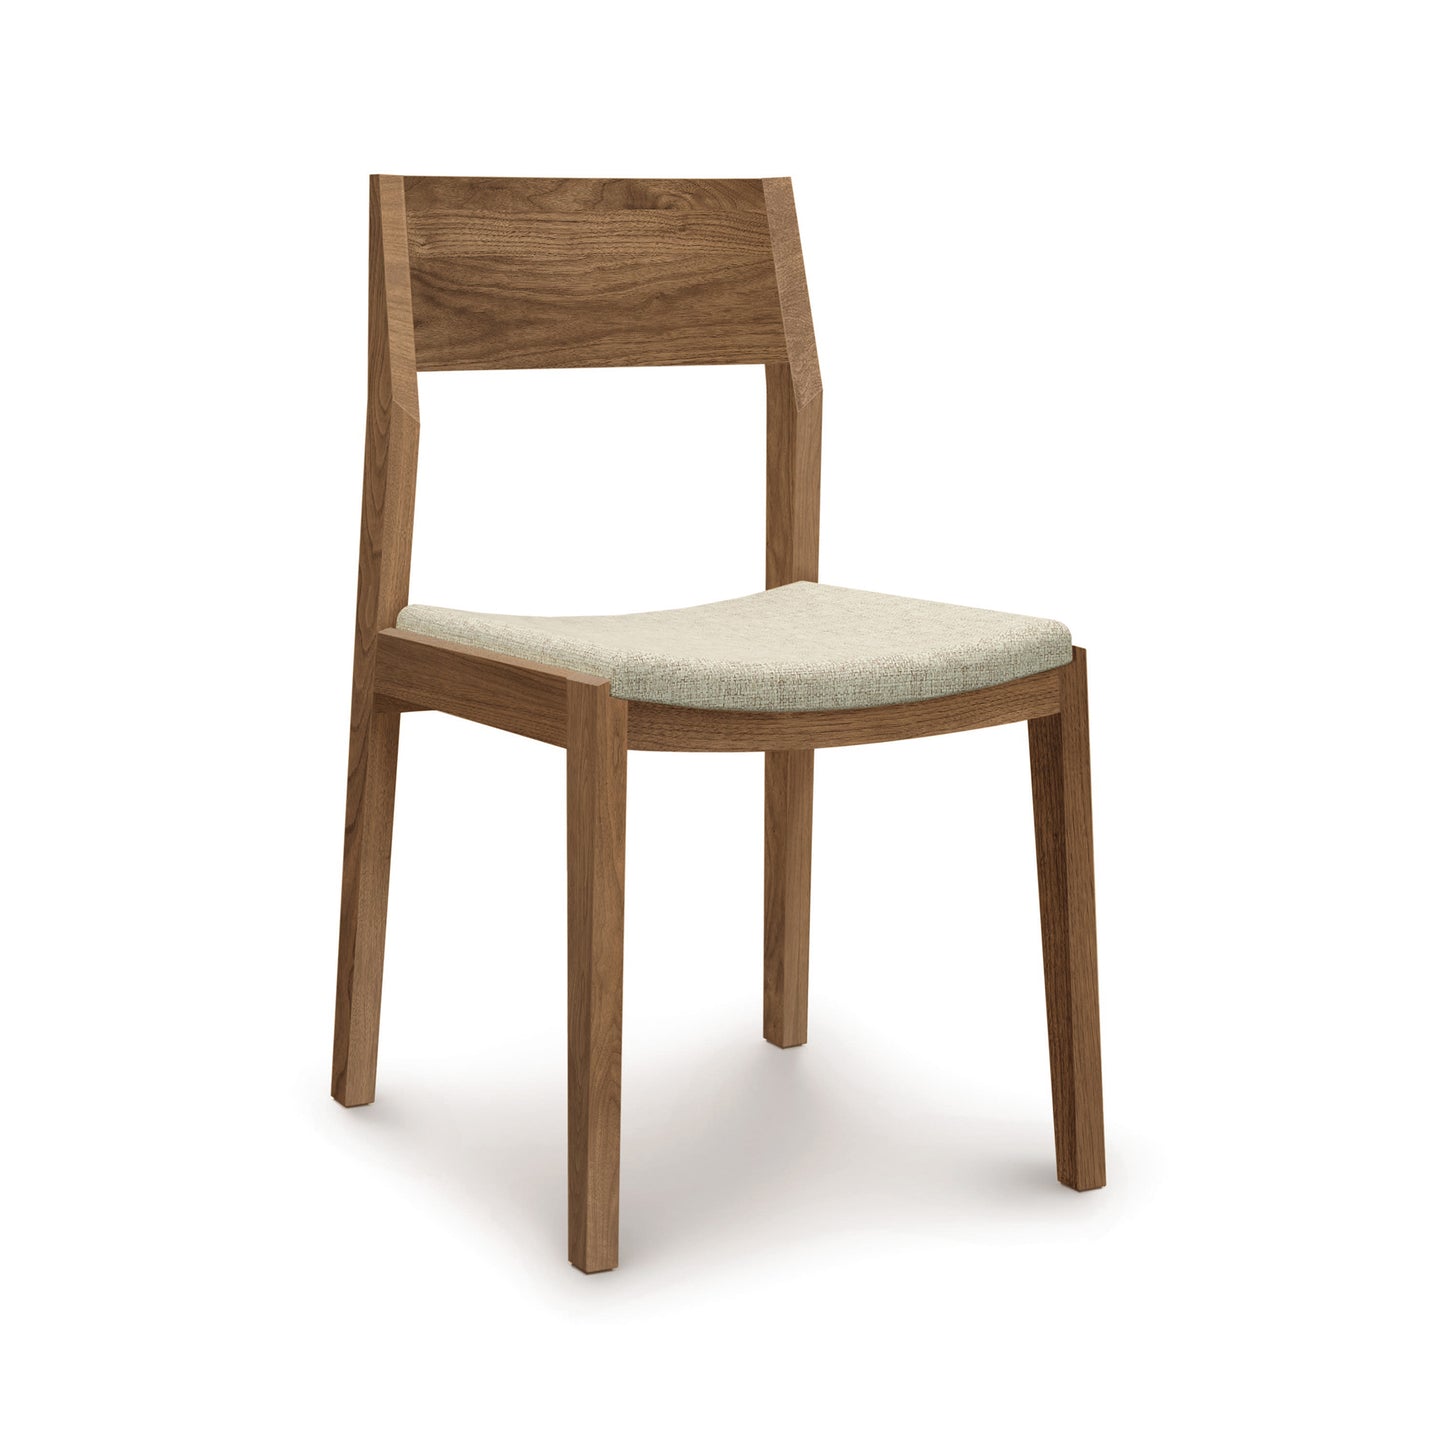 A wooden dining chair with a beige upholstered seat.